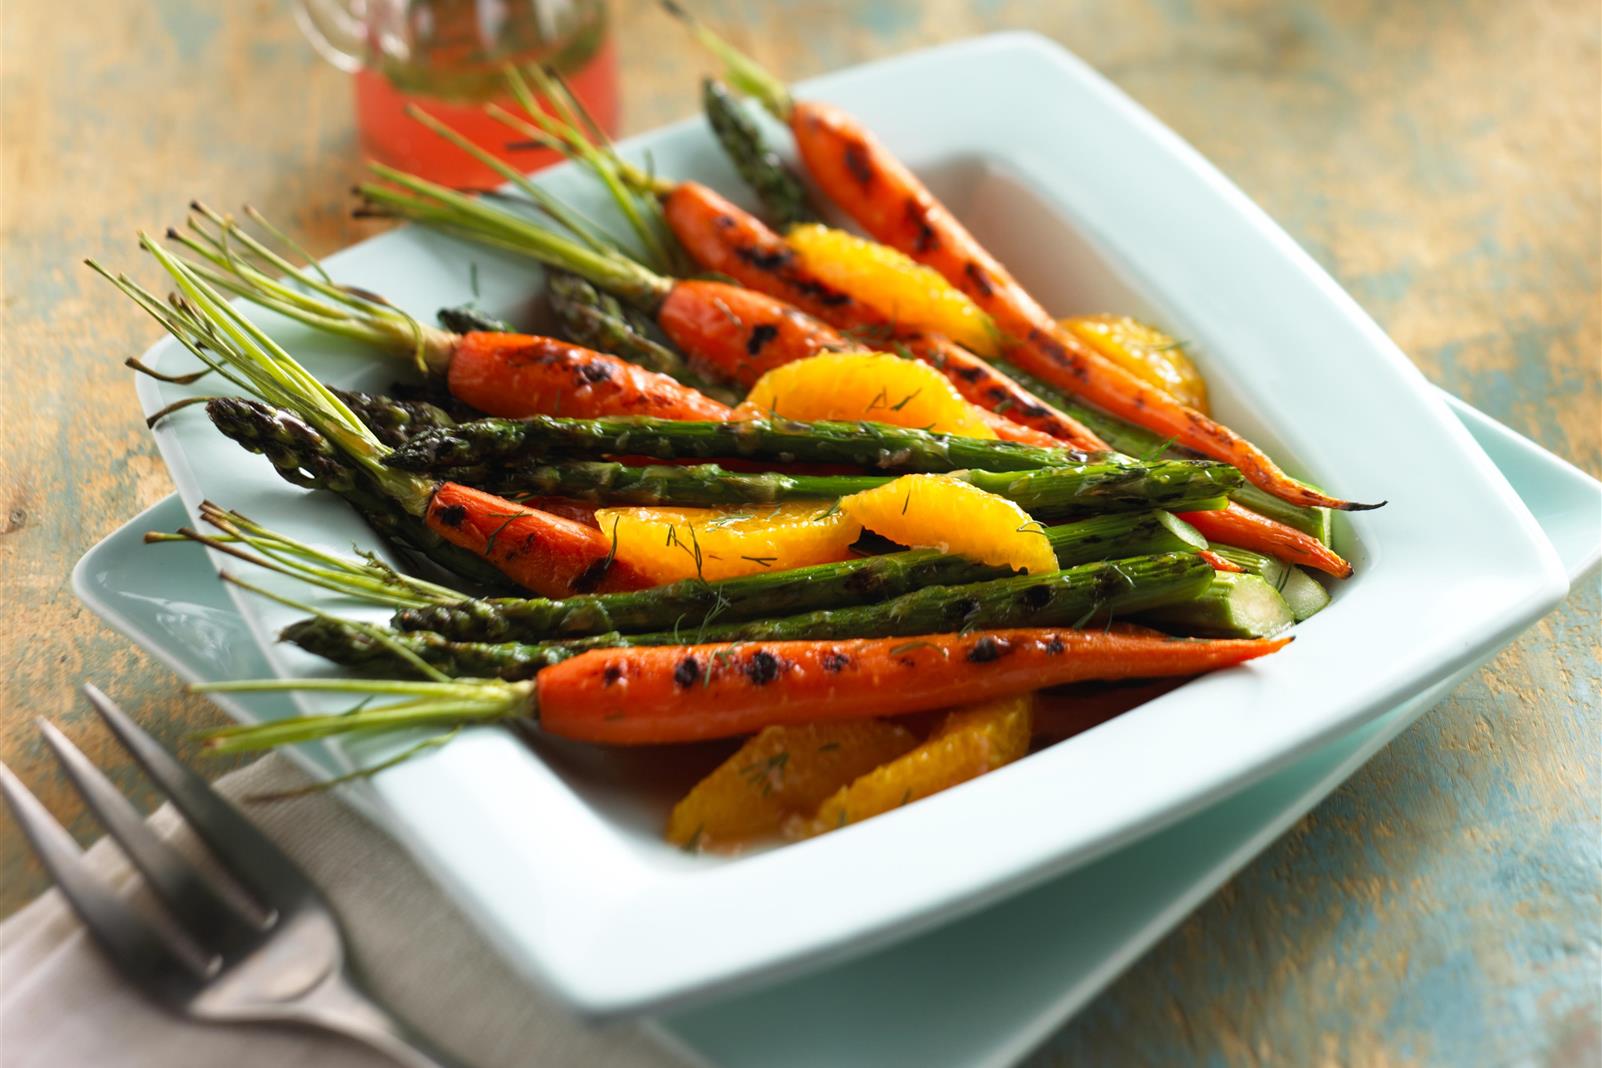 Grilled Asparagus and Carrots with Grapefruit Dill Sauce